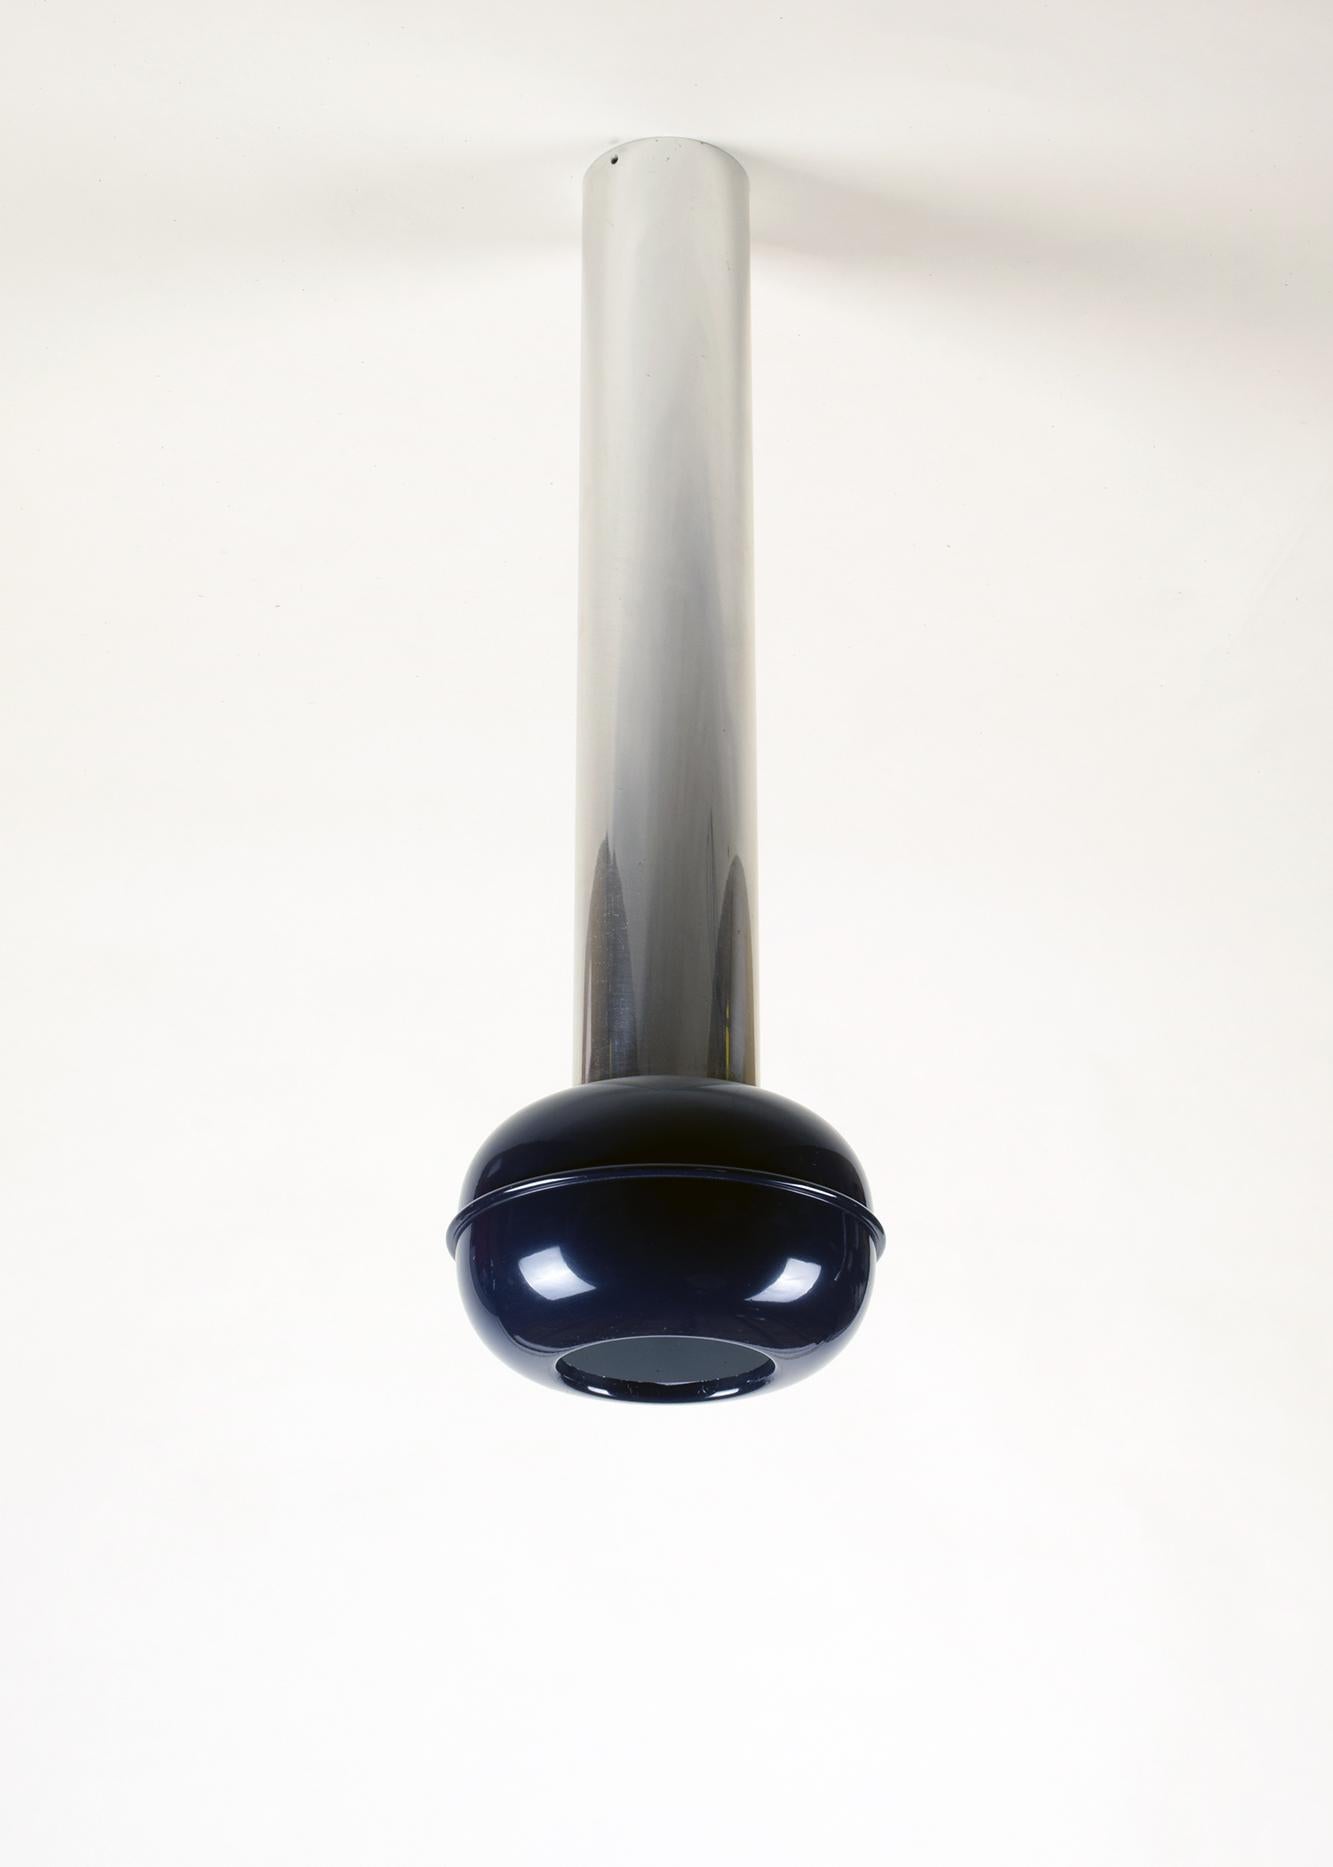 Ettore Sottsass, Austria/Italy (designer)
Stilnovo, Italy (manufacturer)
'Manifesto' ceiling lamp, designed 1970

Chrome-plated and blue lacquered metal shade with white interior. Original bulb holder and wiring. Original ceiling fixing plate